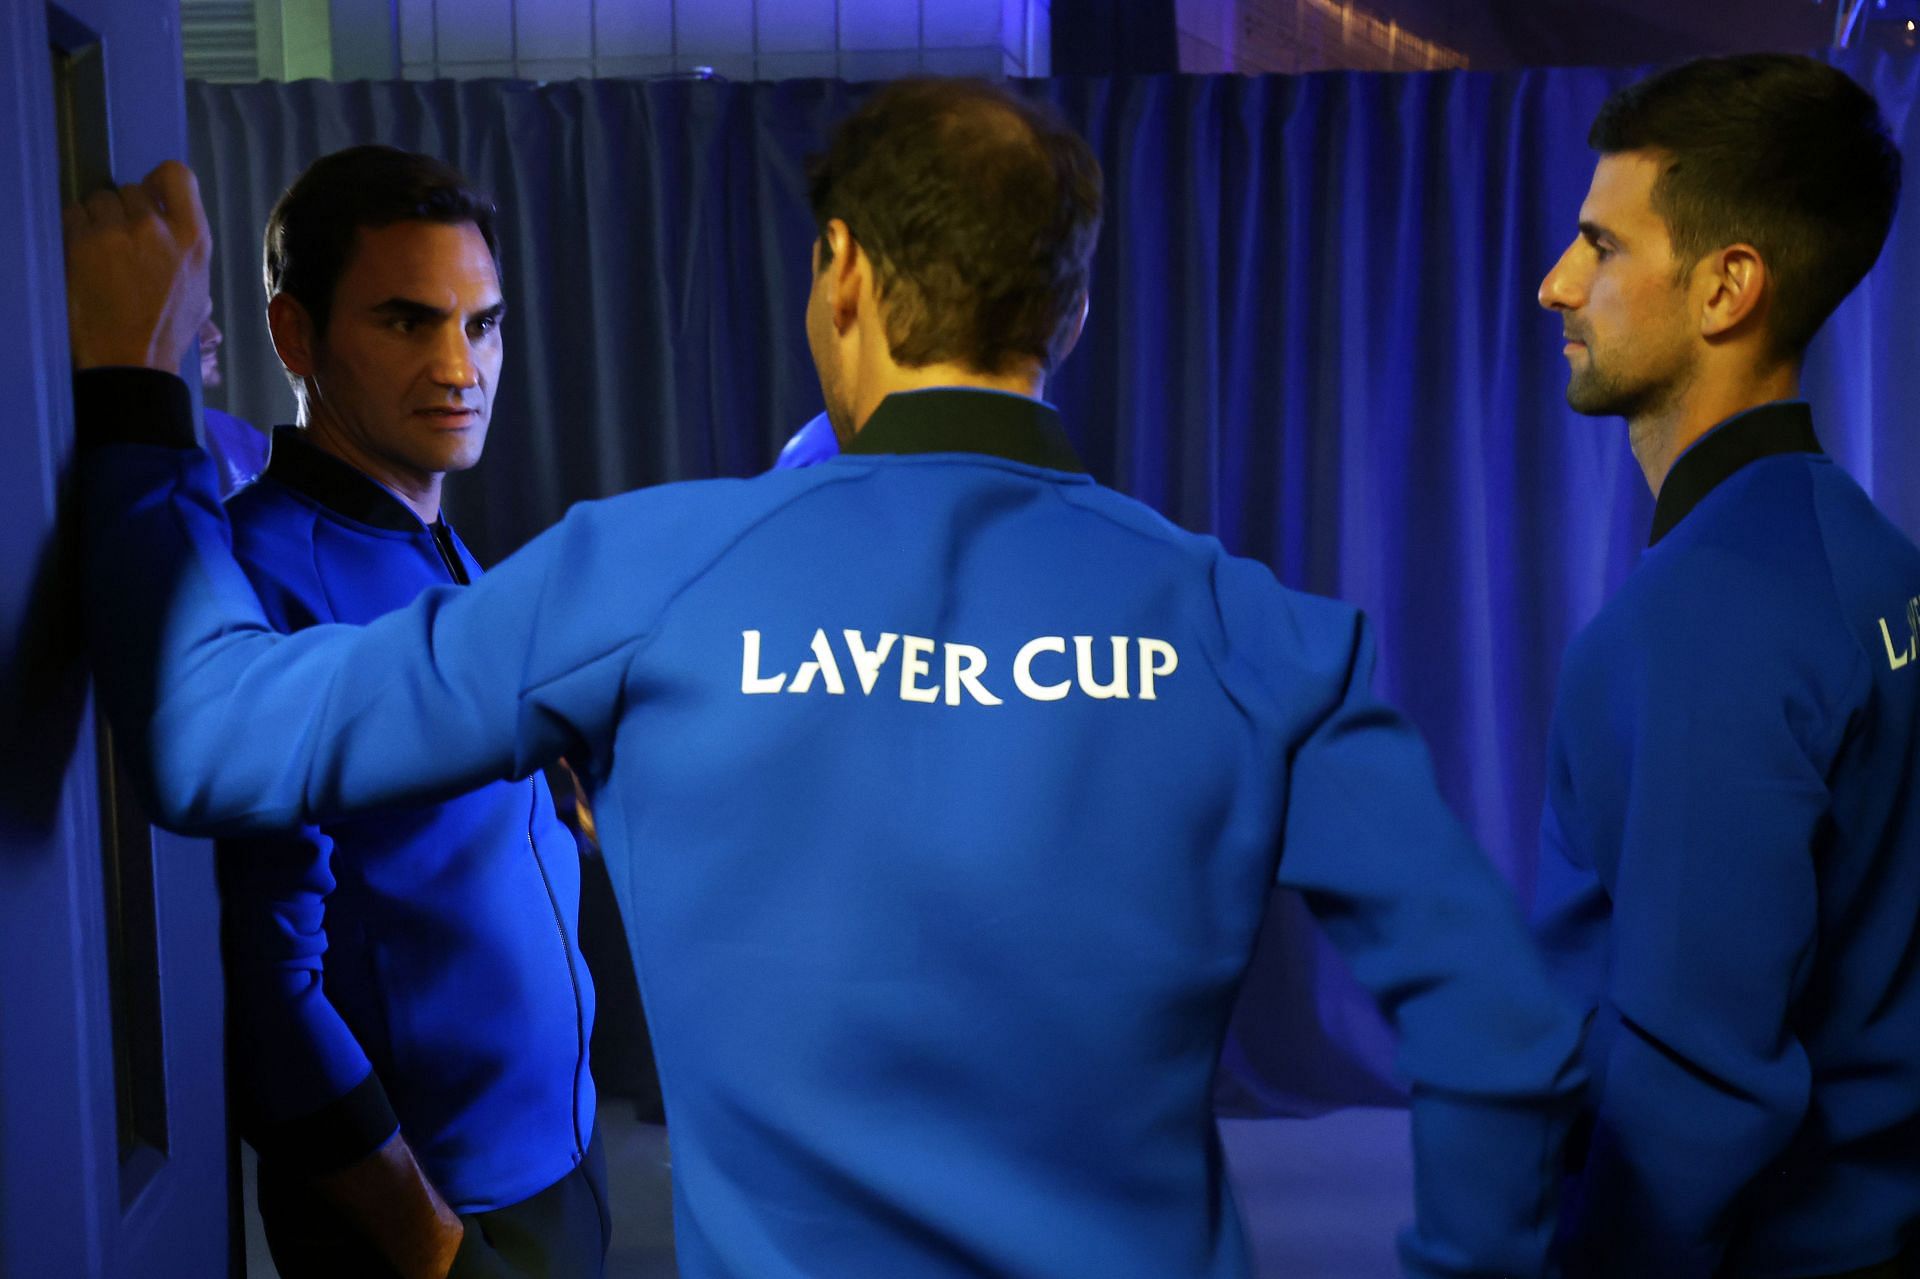 Roger Federer, Rafael Nadal and Novak Djokovic pictured at the 2022 Laver Cup.